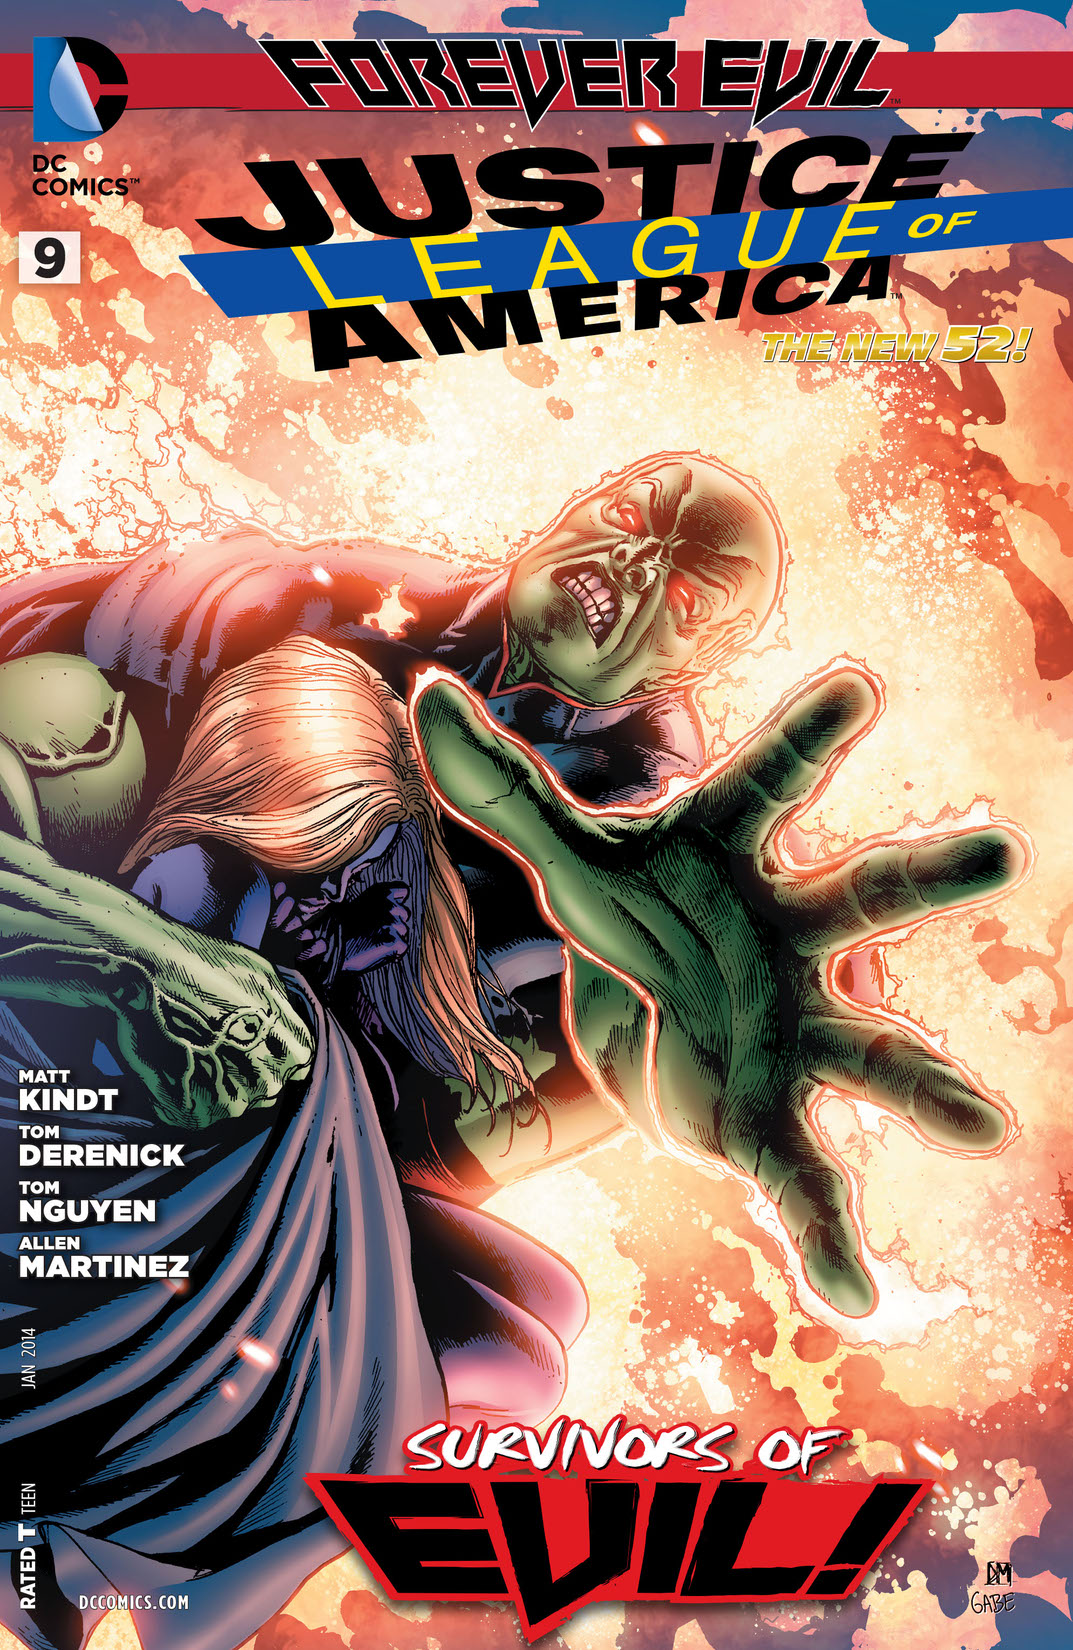 Justice League of America (2013-) #9 preview images